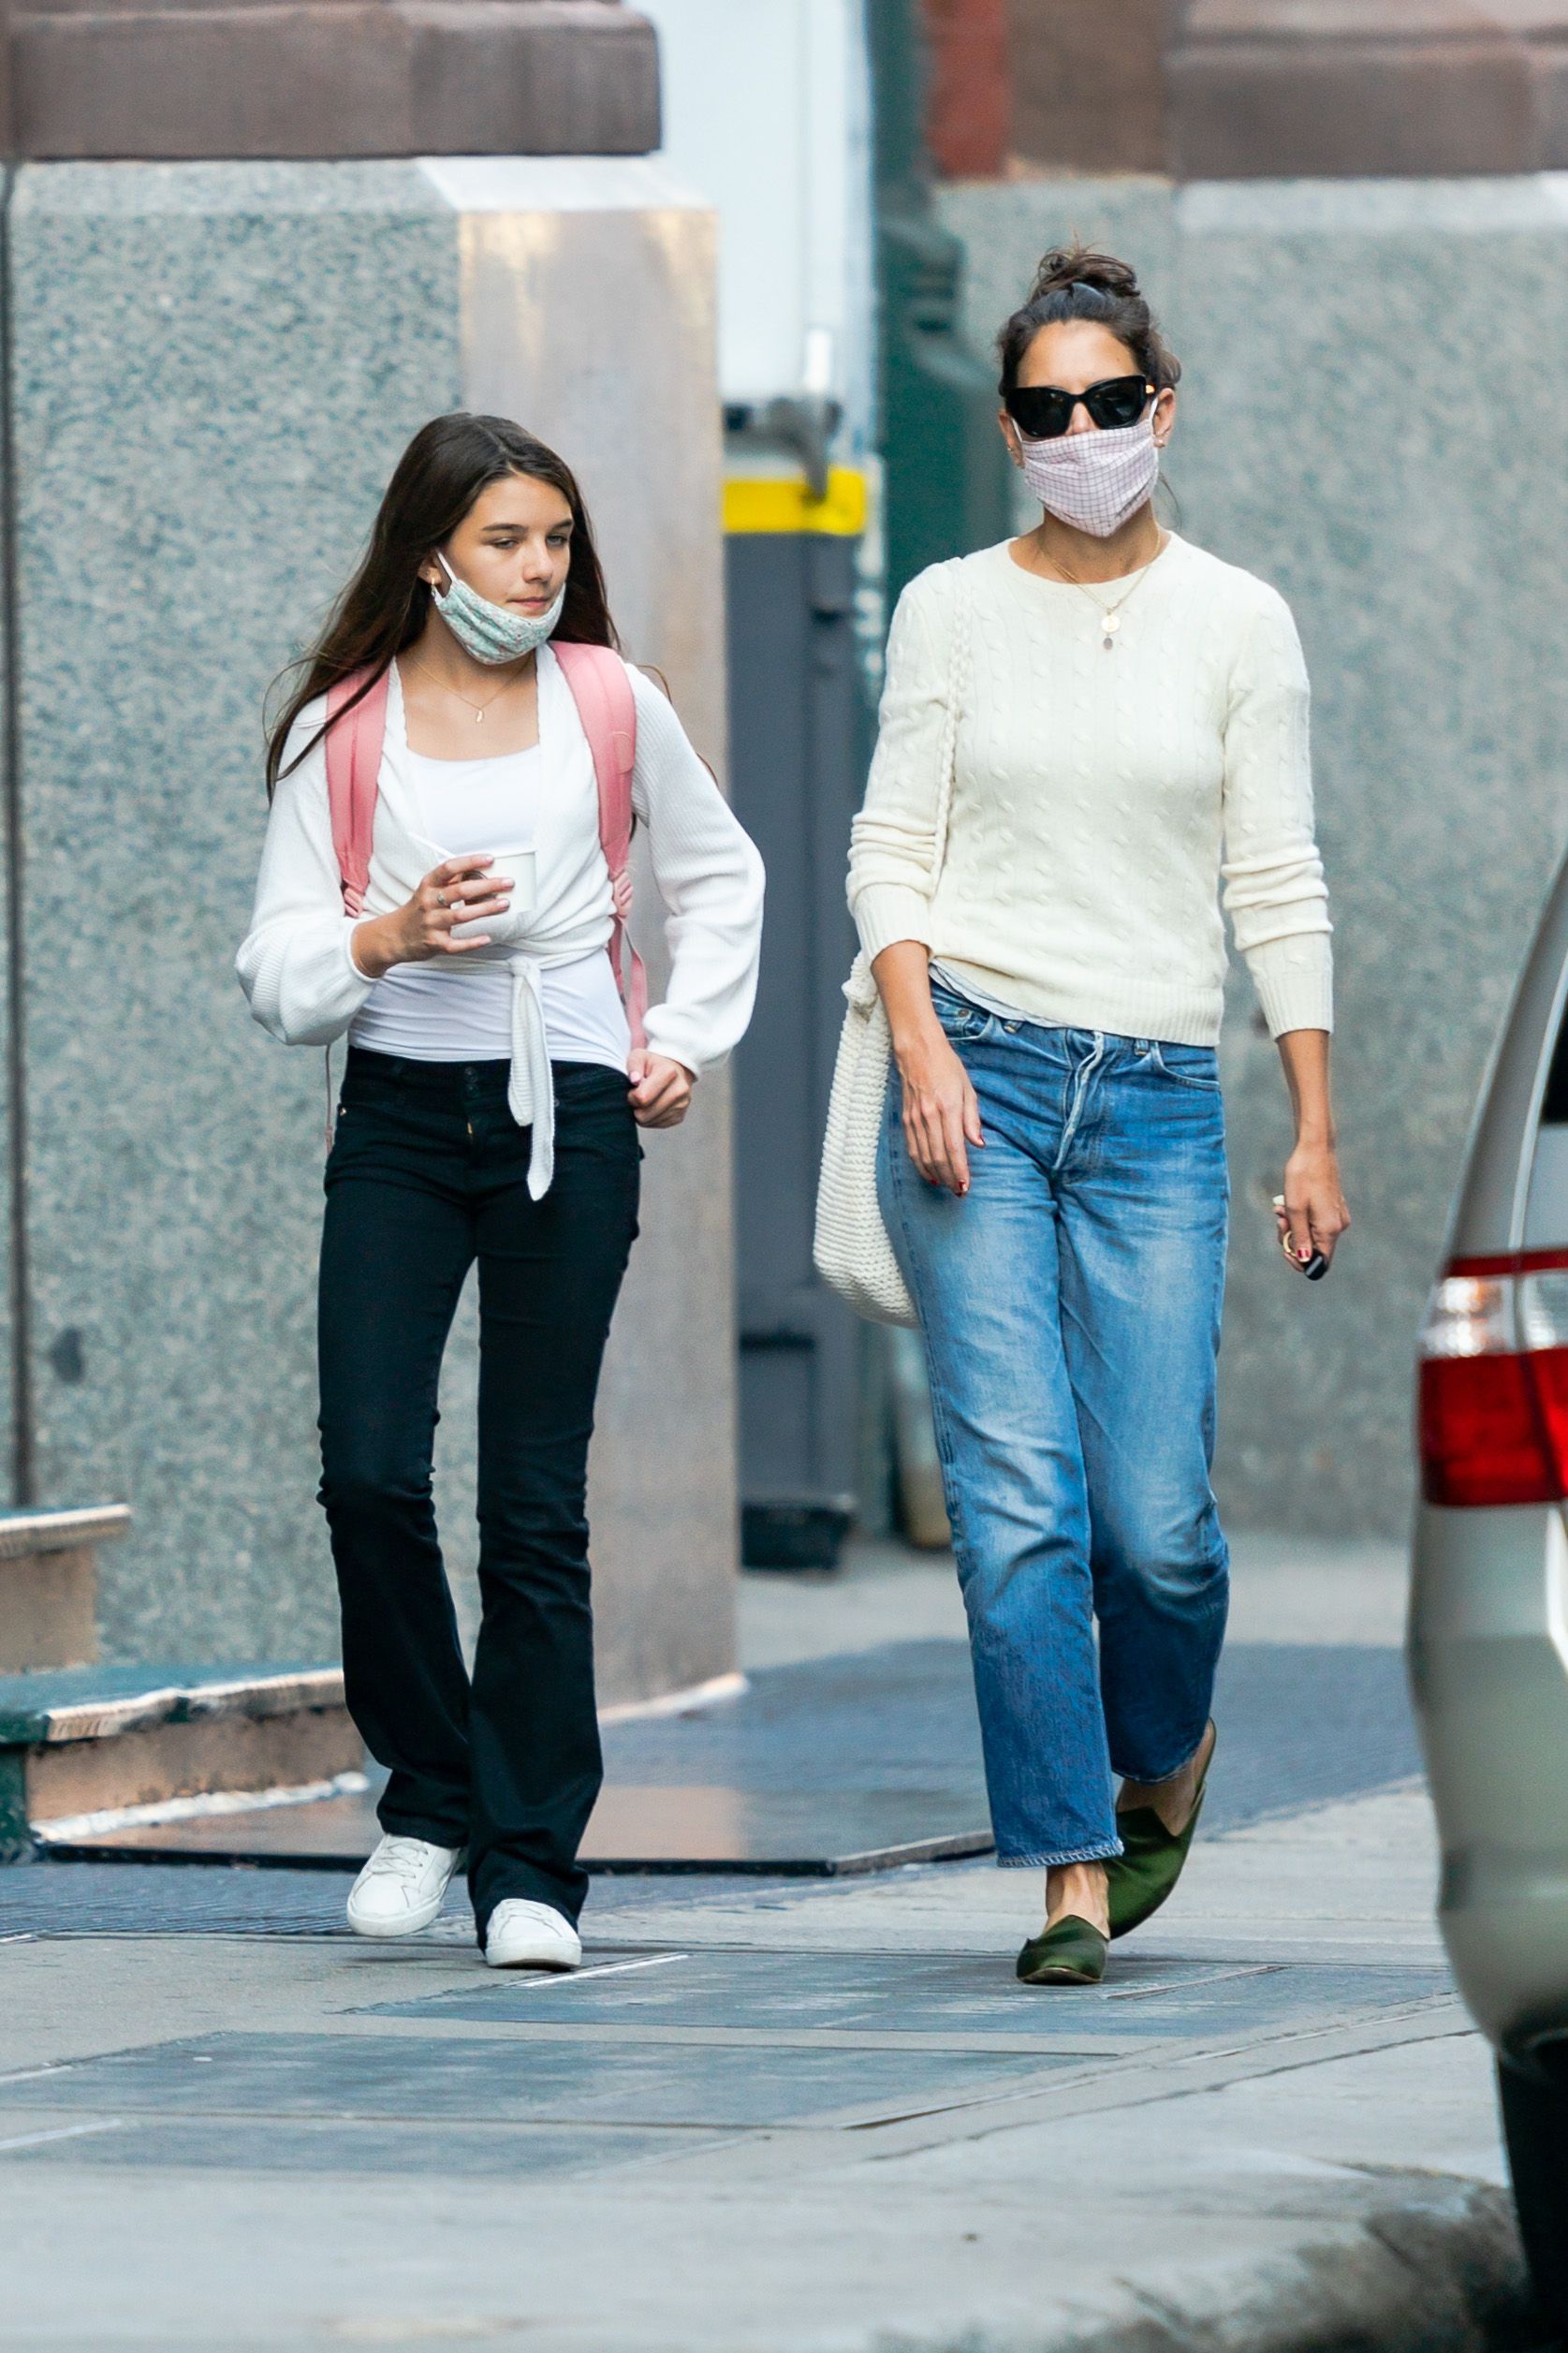 Suri Cruise and Katie Holmes are seen in New York City, on September 8, 2020. | Source: Getty Images